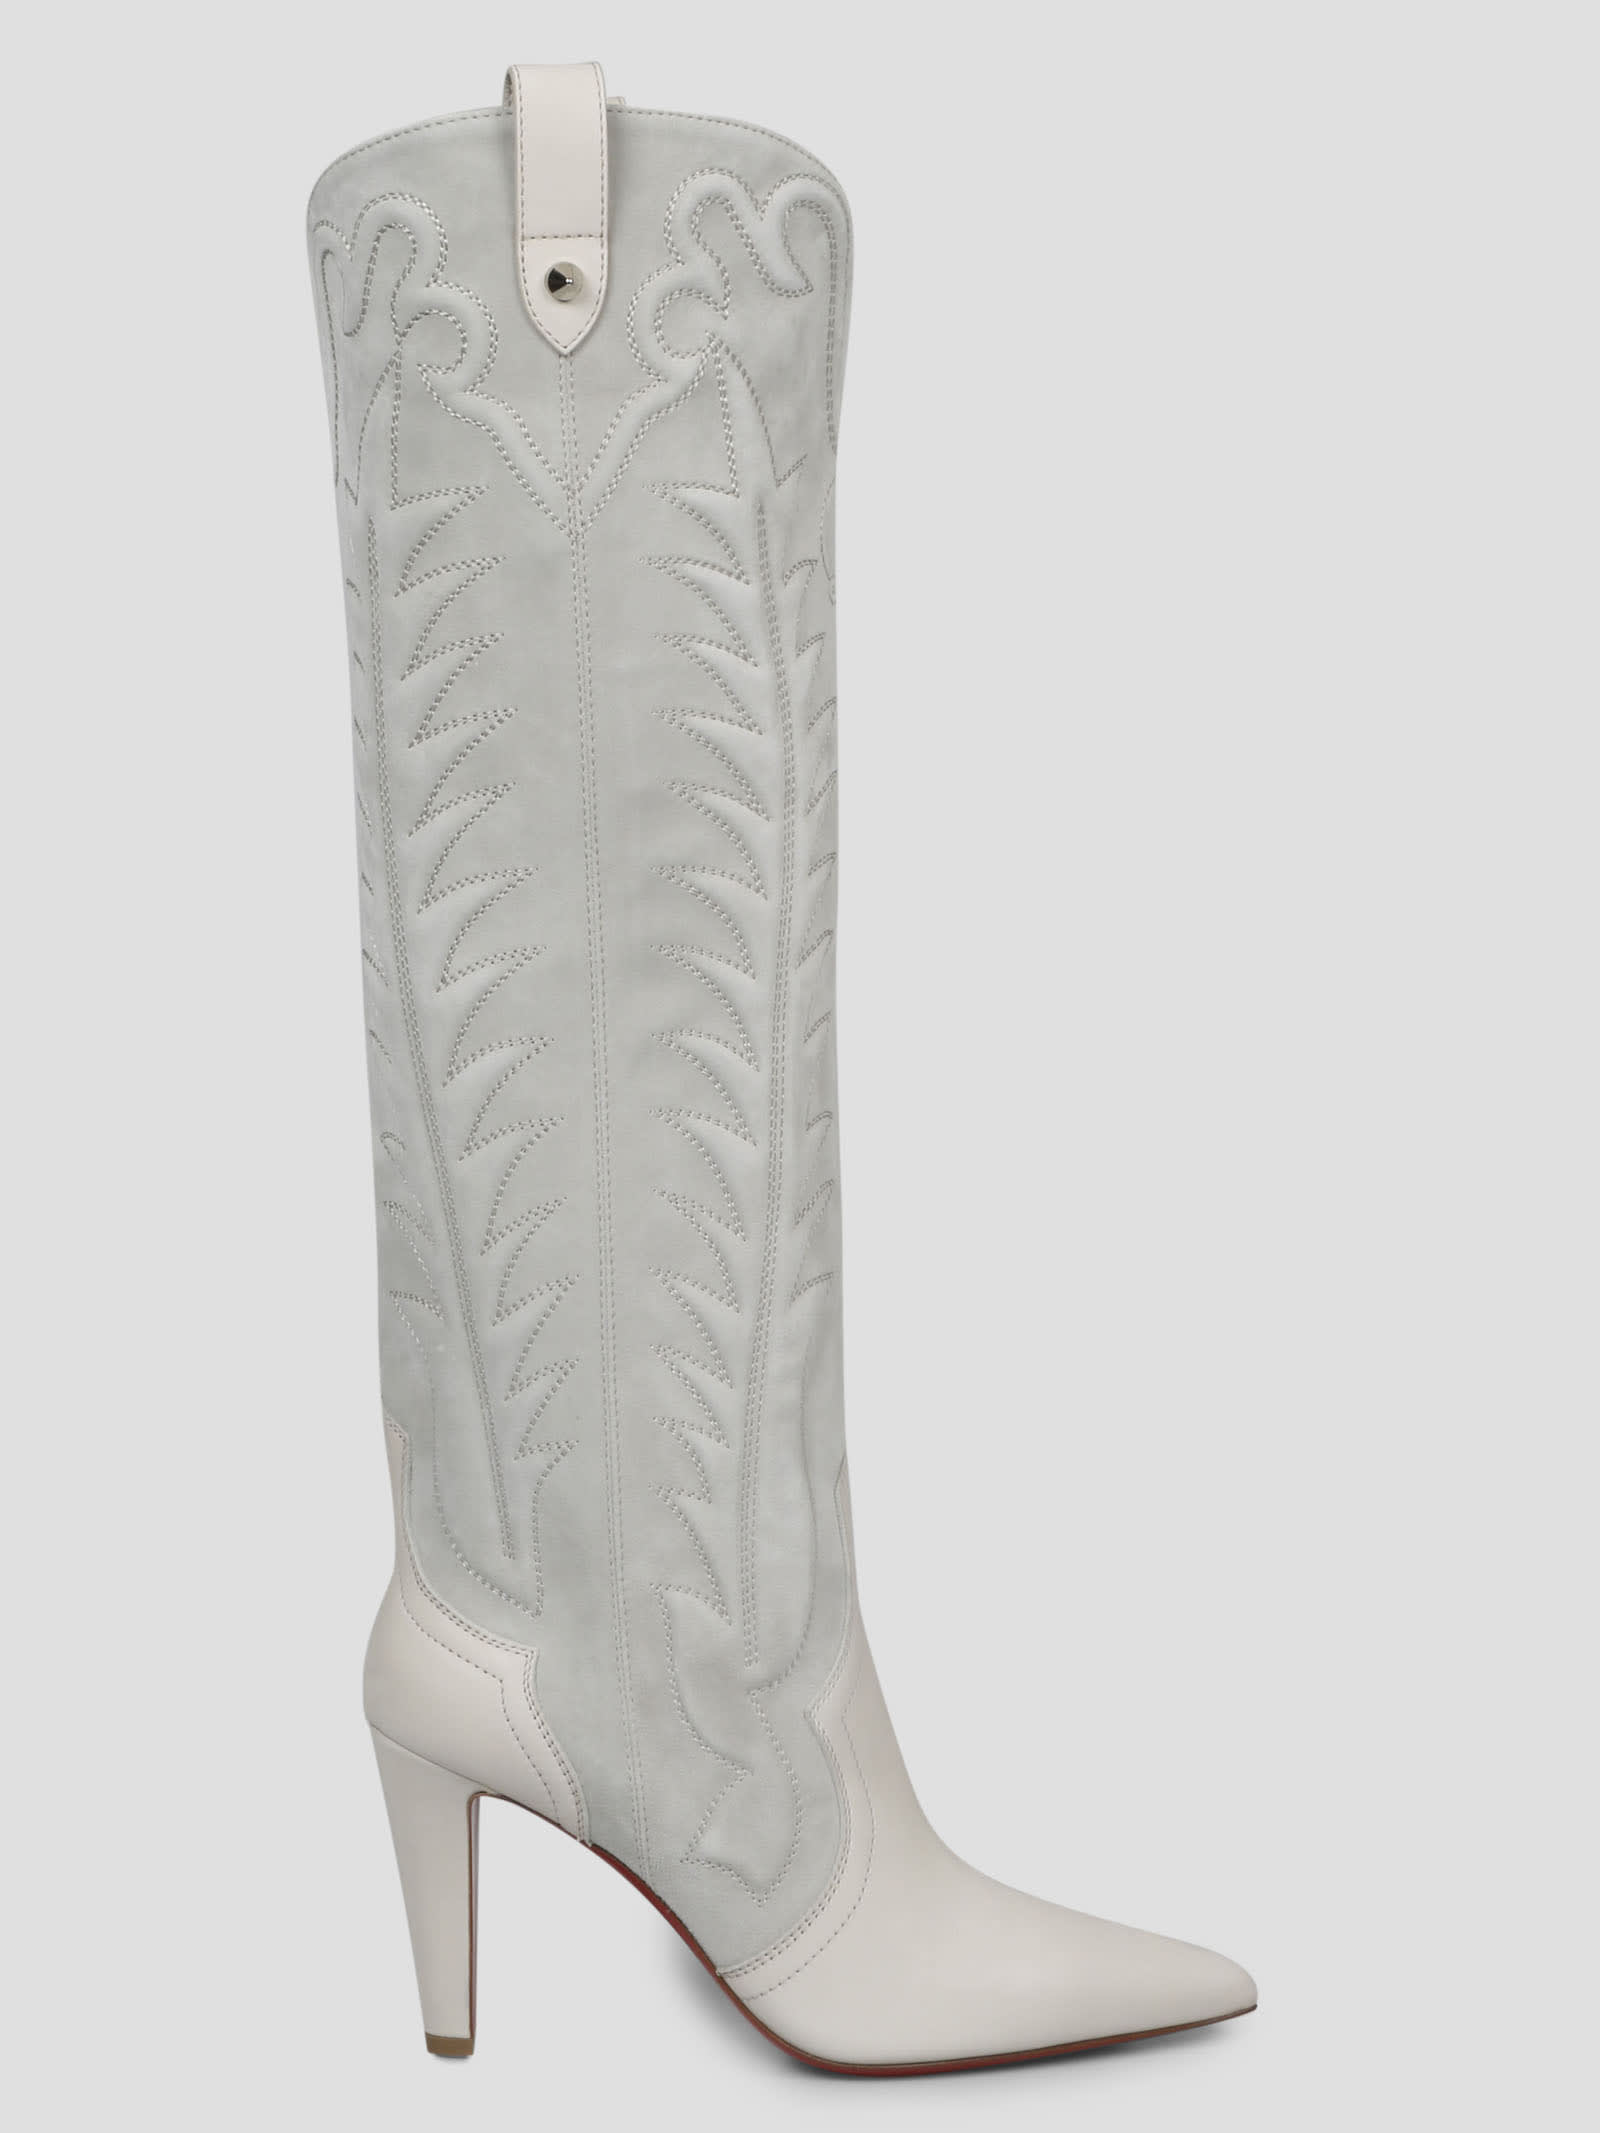 Christian Louboutin Santia Botta Leather Knee-High Boots from